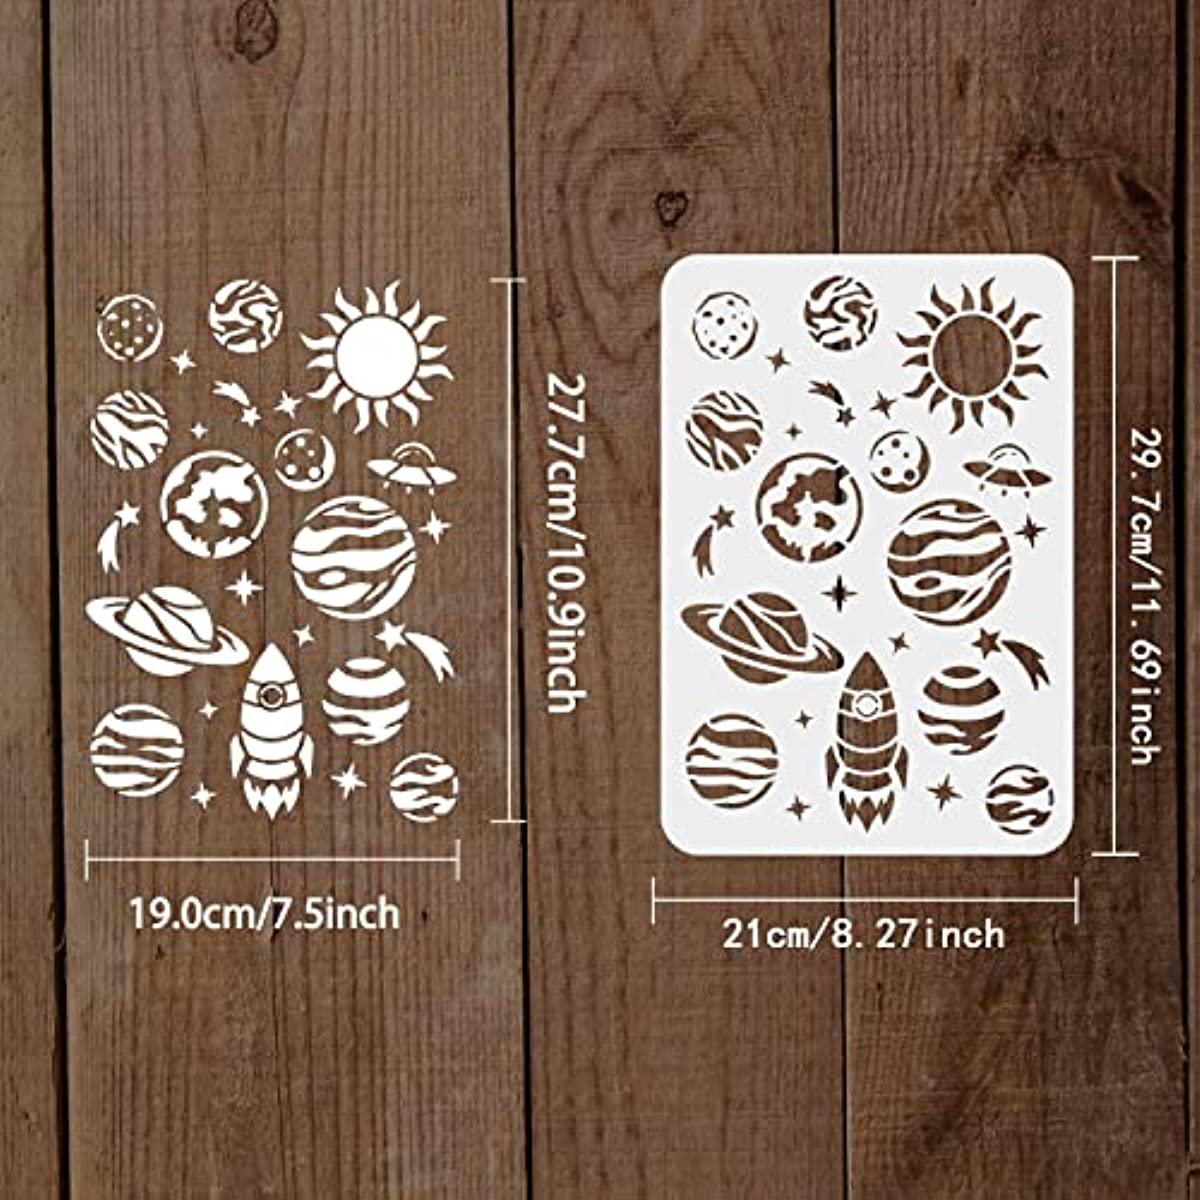 Space Stencil Reusable Planet Drawing Stencil Planets Galaxy Stencil Plastic PLANETARY Stencil Sun Moon Star Stencil for Painting on Wood Floor